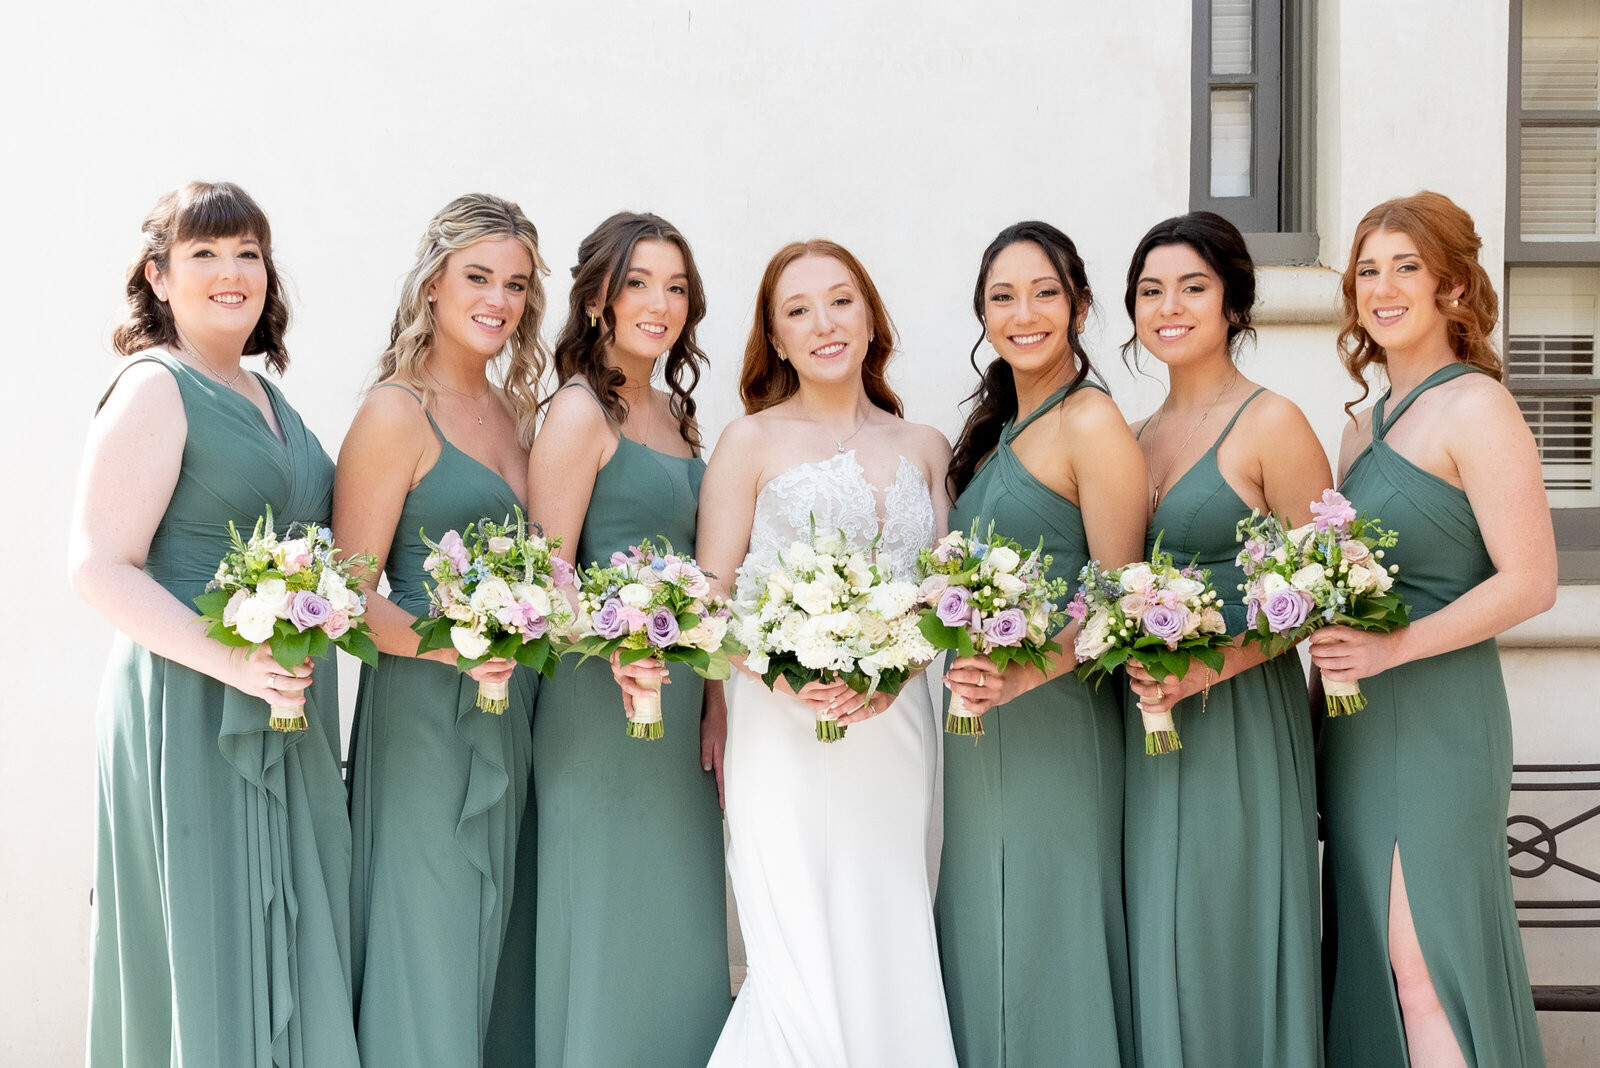 Timeless and classic styles for this beautiful country club wedding.